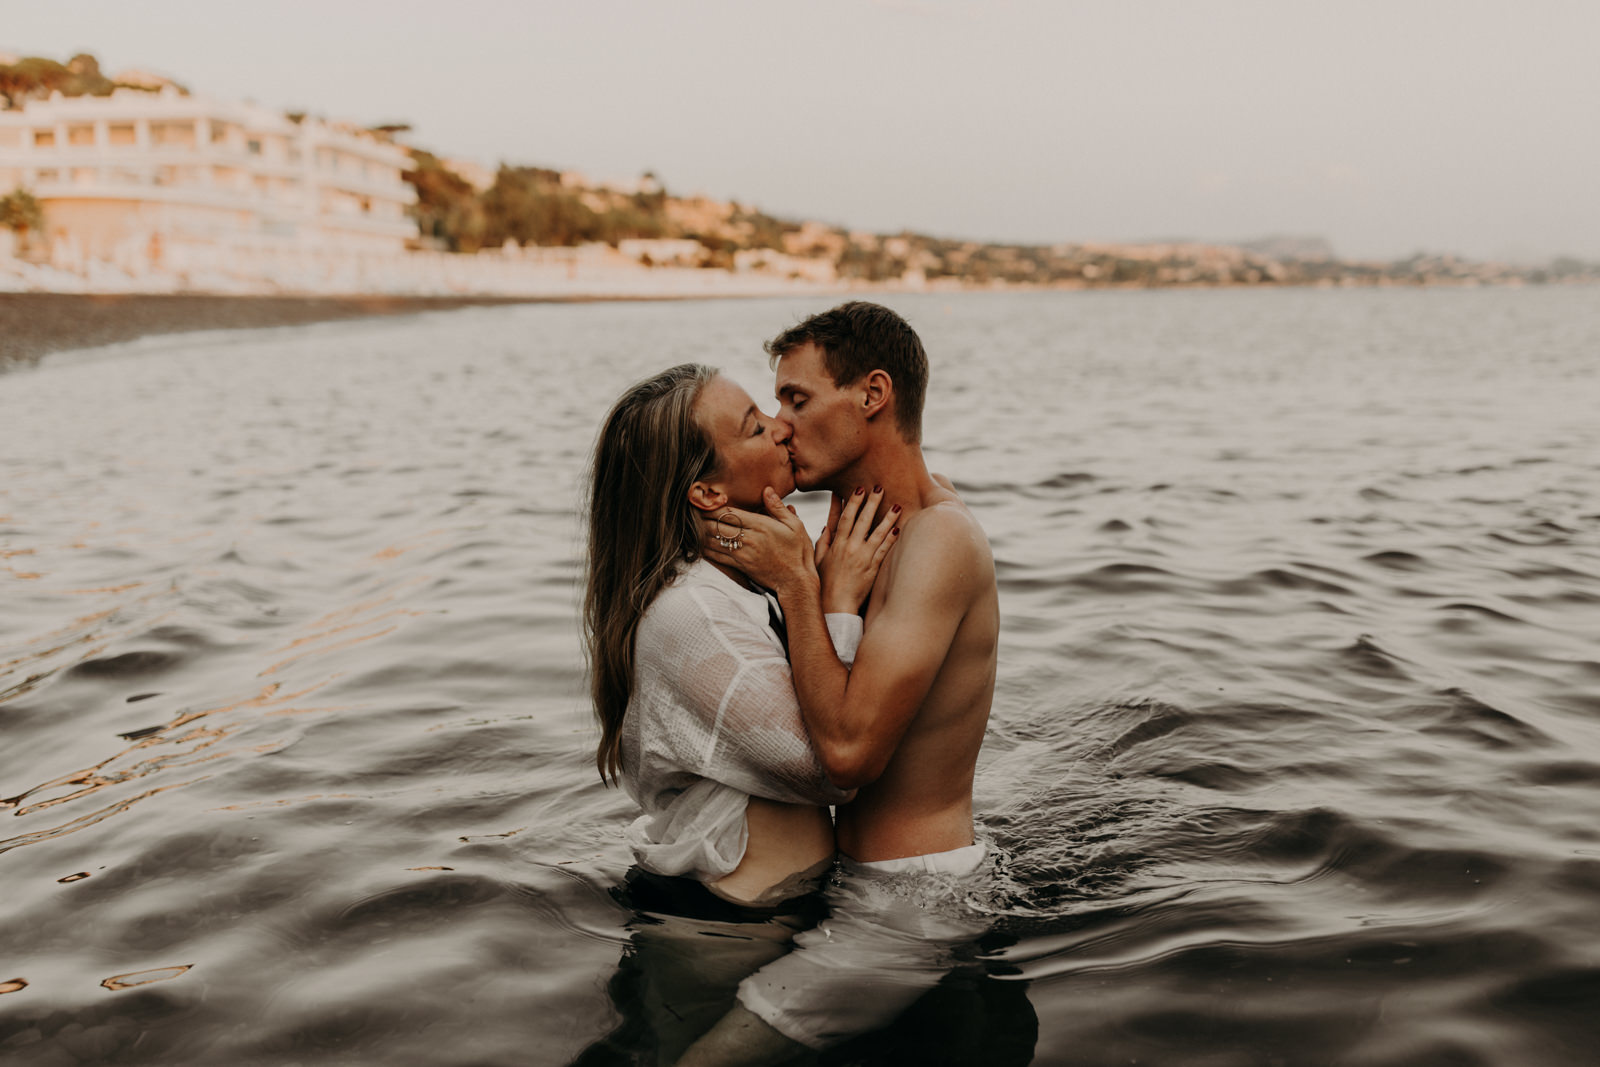 Engagement Session In Palermo by Clémence Cosnefroy